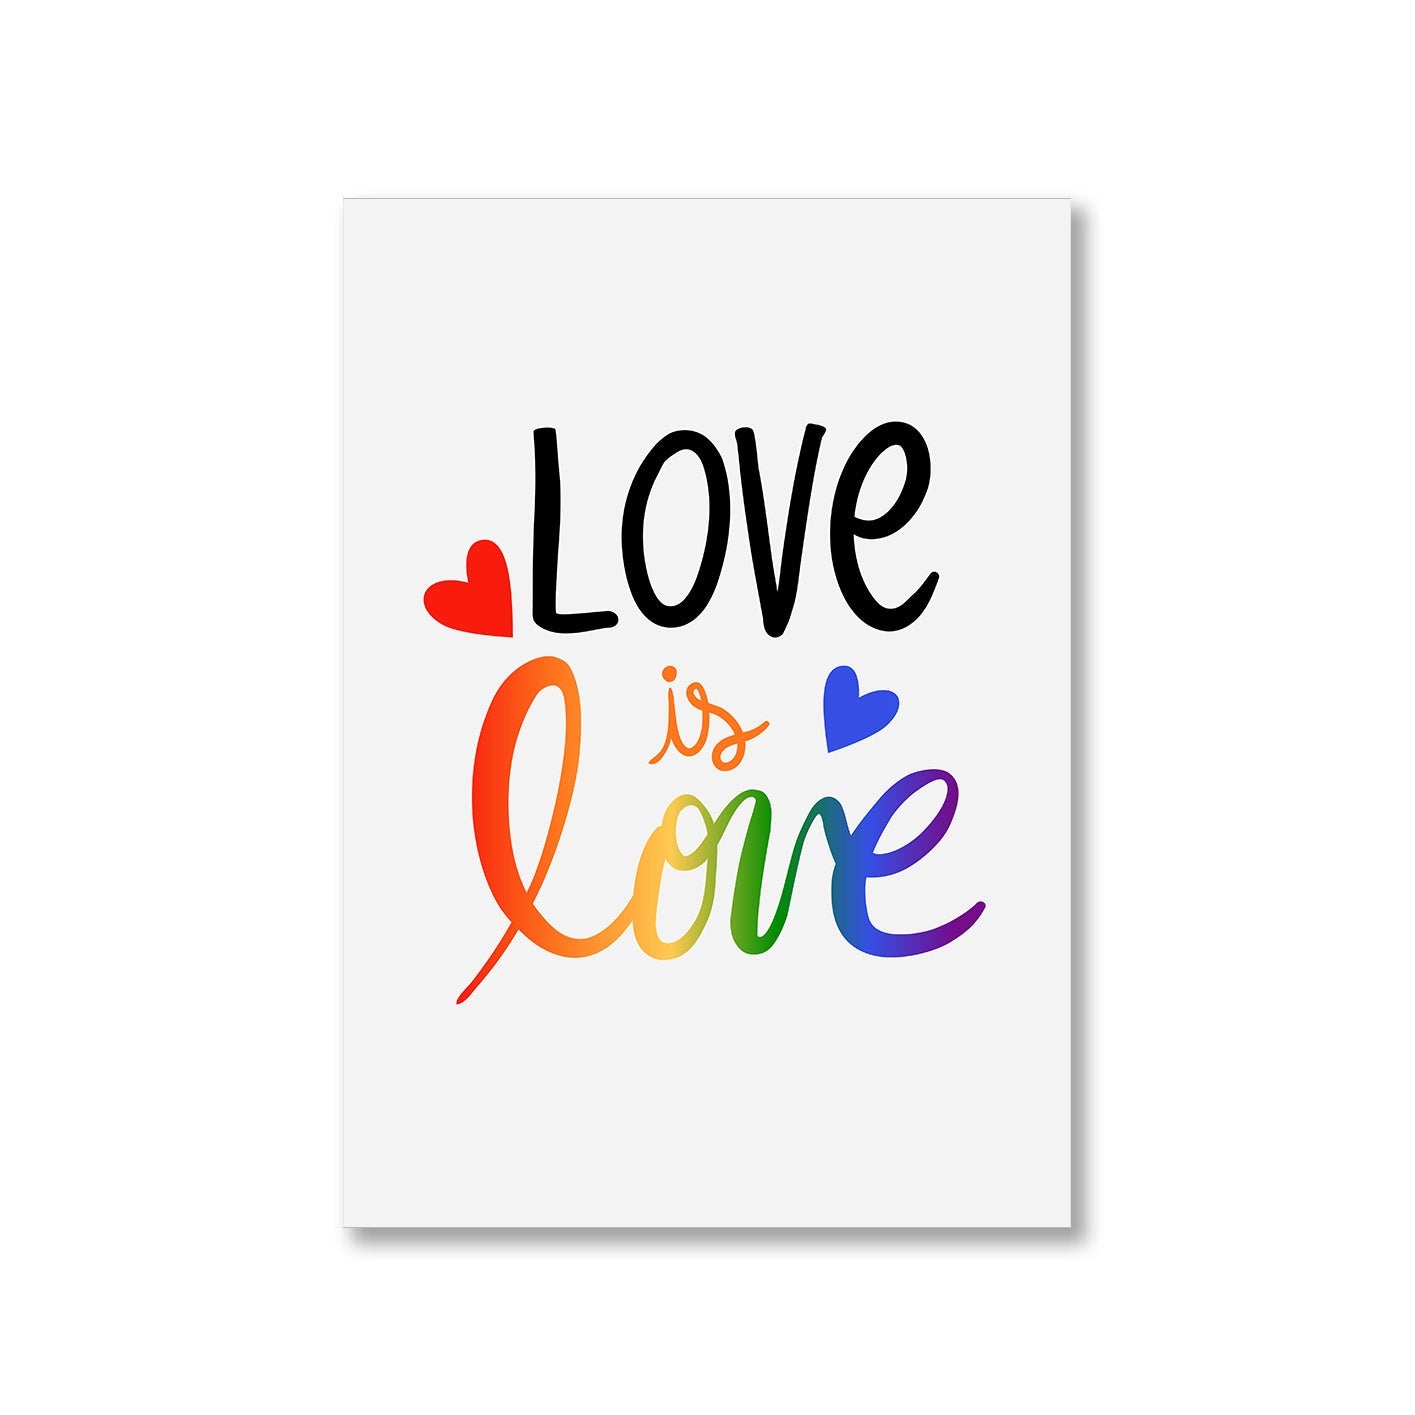 pride love is love poster wall art buy online india the banyan tee tbt a4 - lgbtqia+